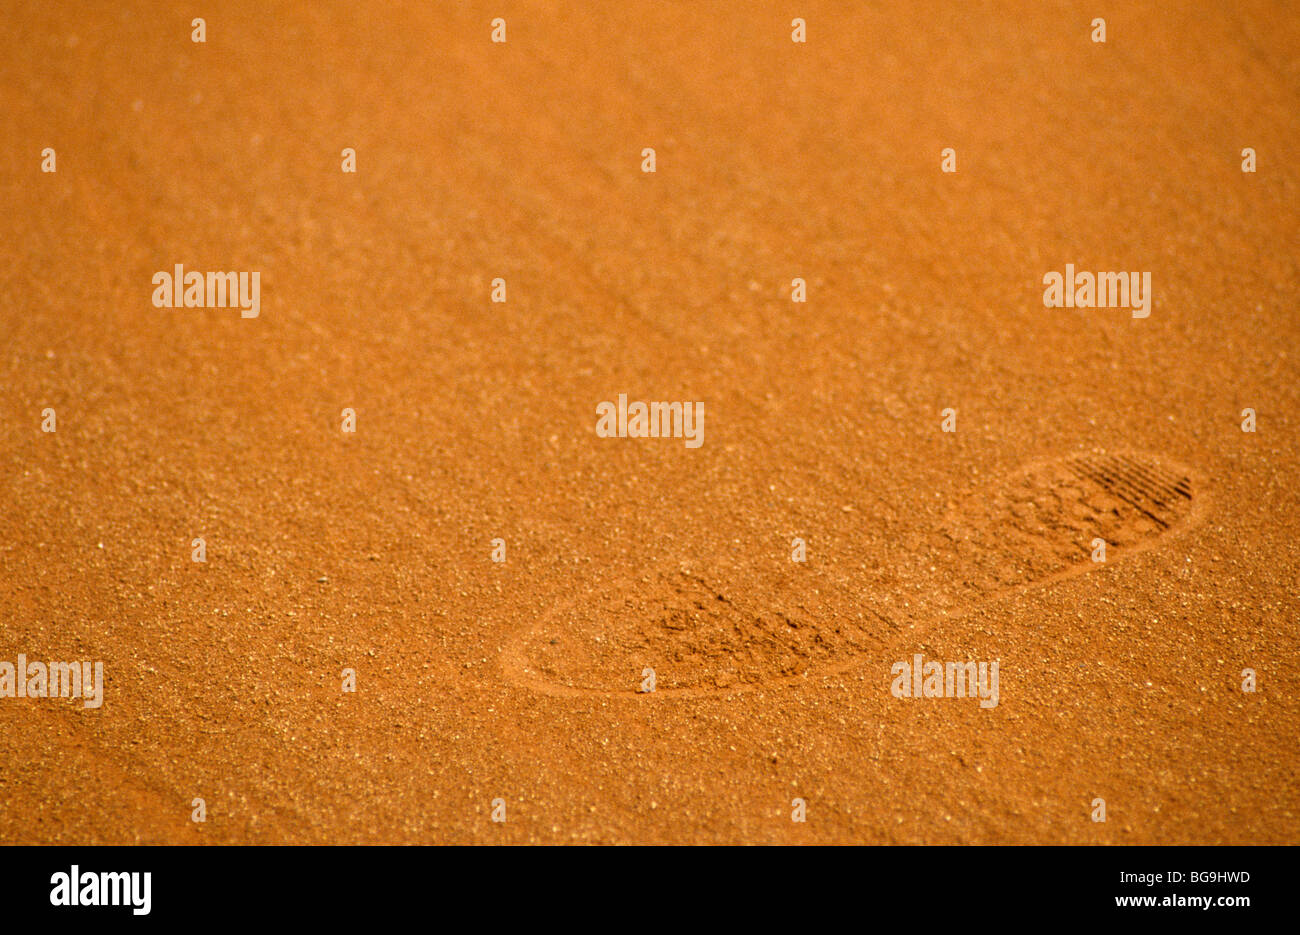 Tennis shoe imprint on a clay court Stock Photo